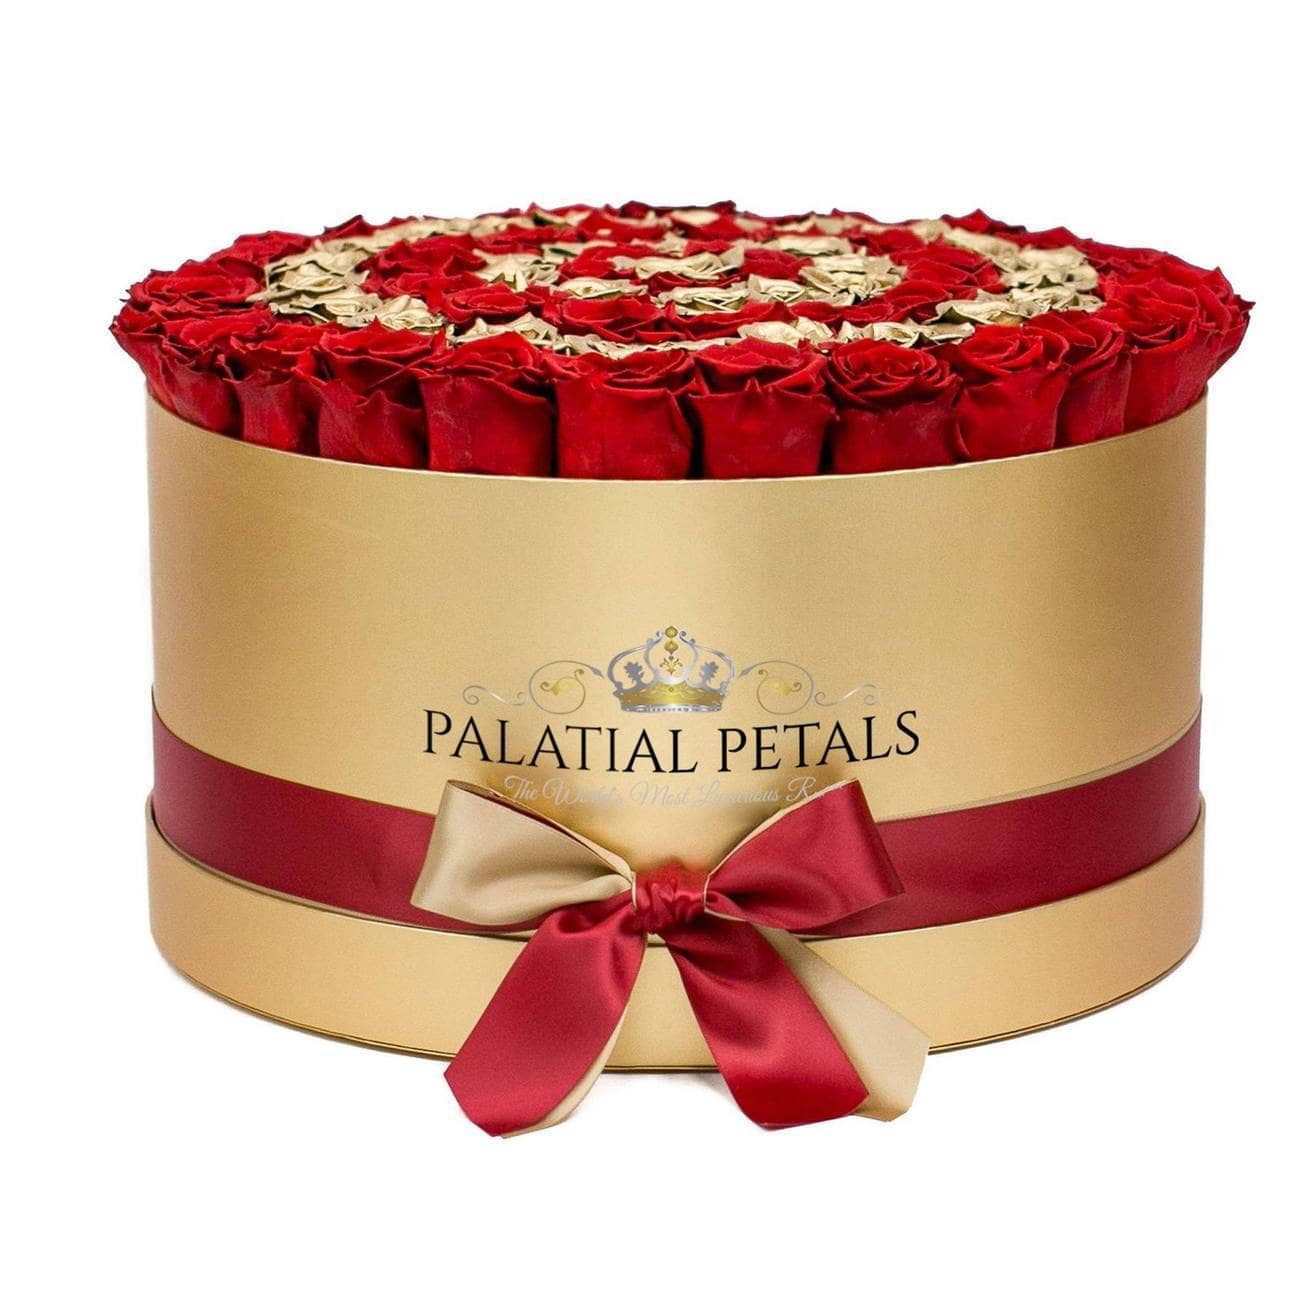 Red & 24K Gold Roses That Last A Year (Target) - Deluxe Rose Box